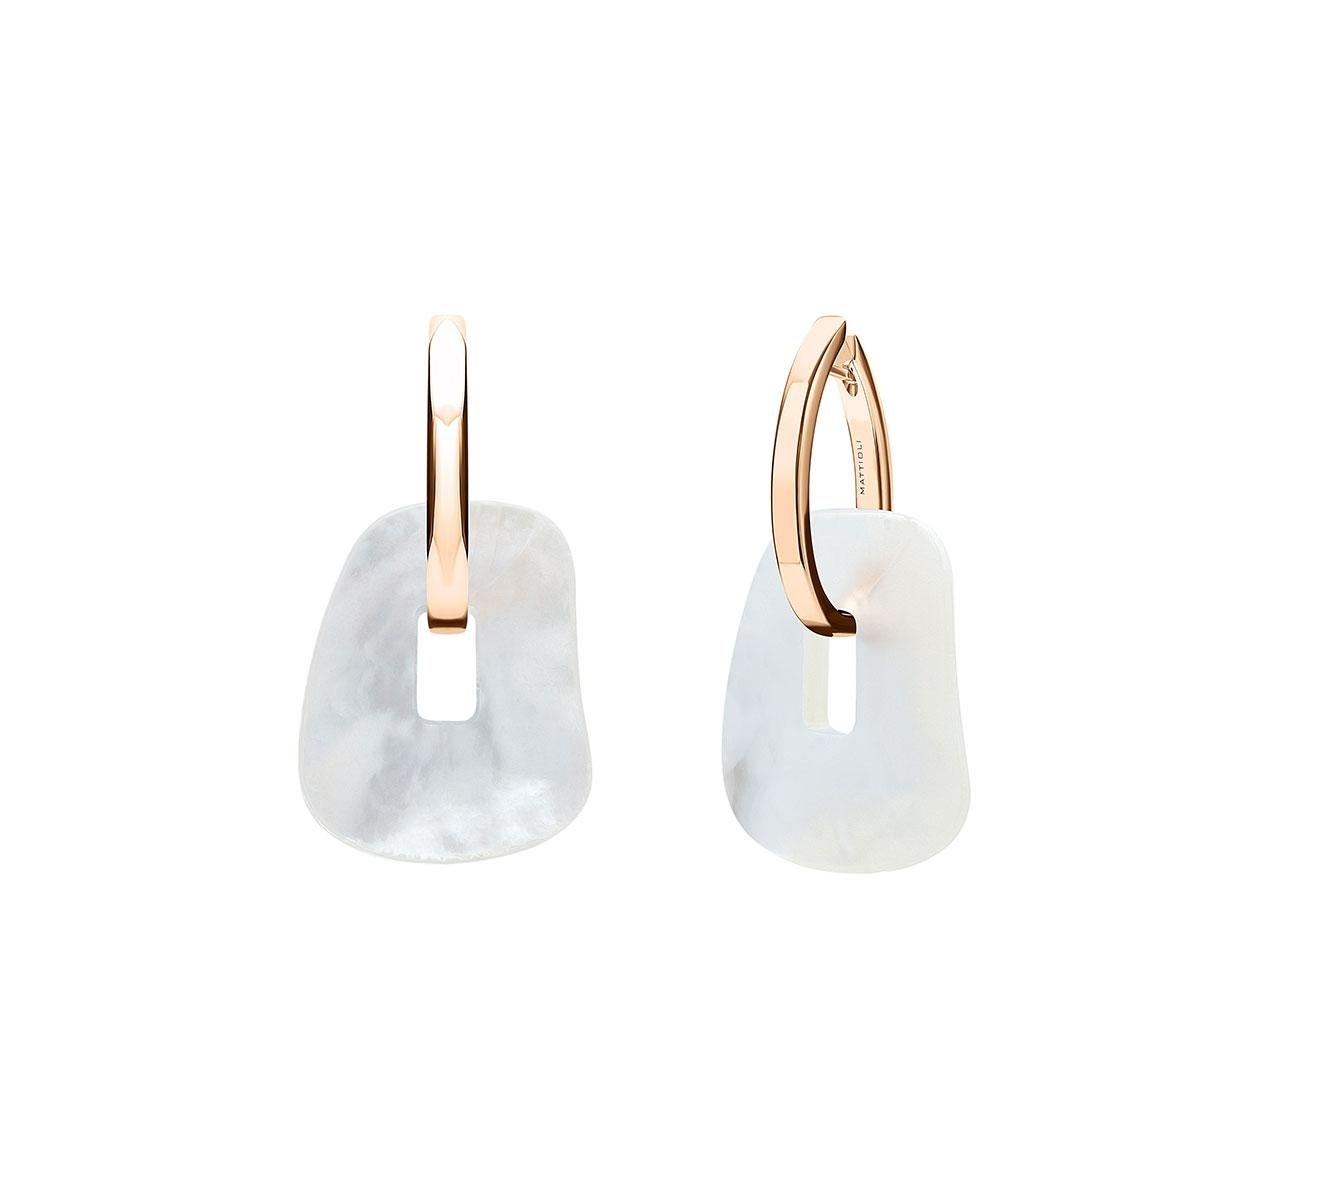 Mattioli Puzzle Collection Earrings, 18k Gold
11 Pairs of Coloured Puzzles Medium Size
Options of gold:  rose (Mattioli favourite colour), yellow and white 
Earrings in white gold 7.80 grams, 

The Mother of pearl pendant multicolored pieces are